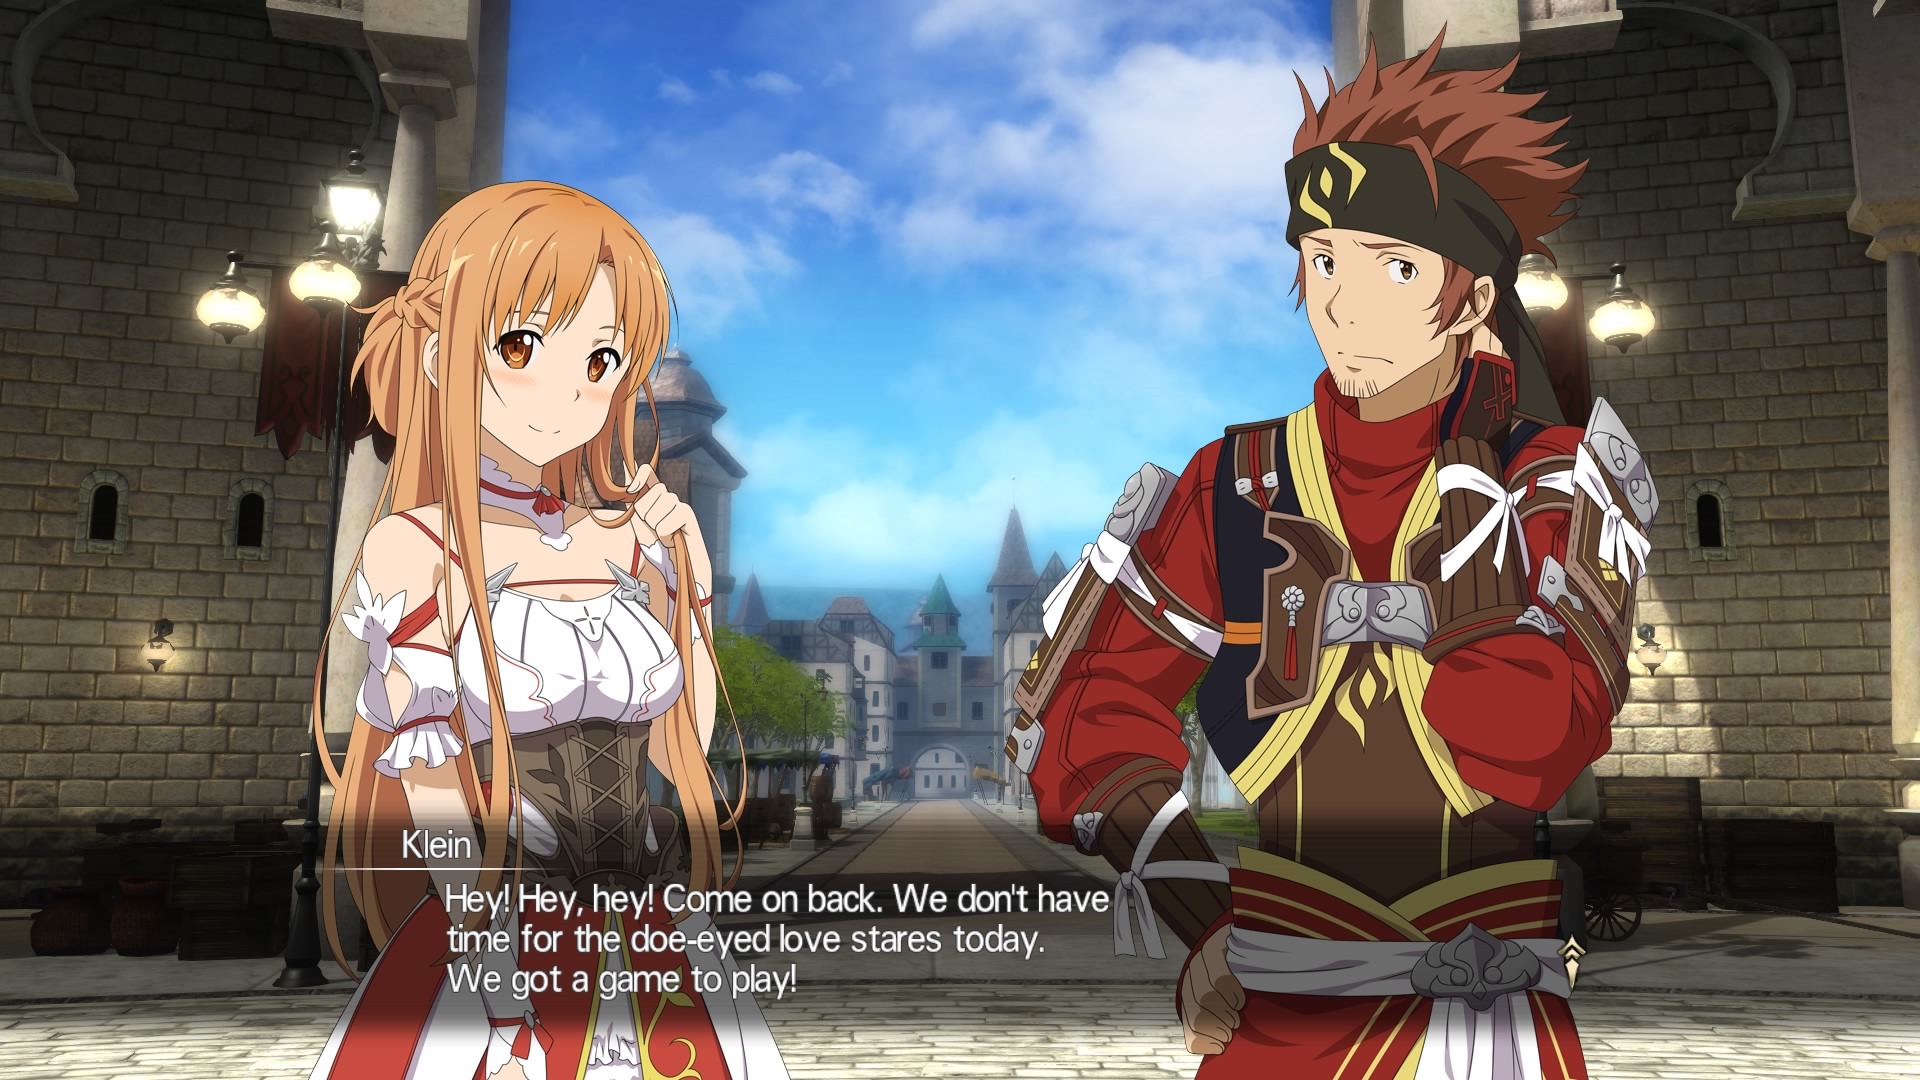 Sword Art Online: Hollow Realization - Game Overview